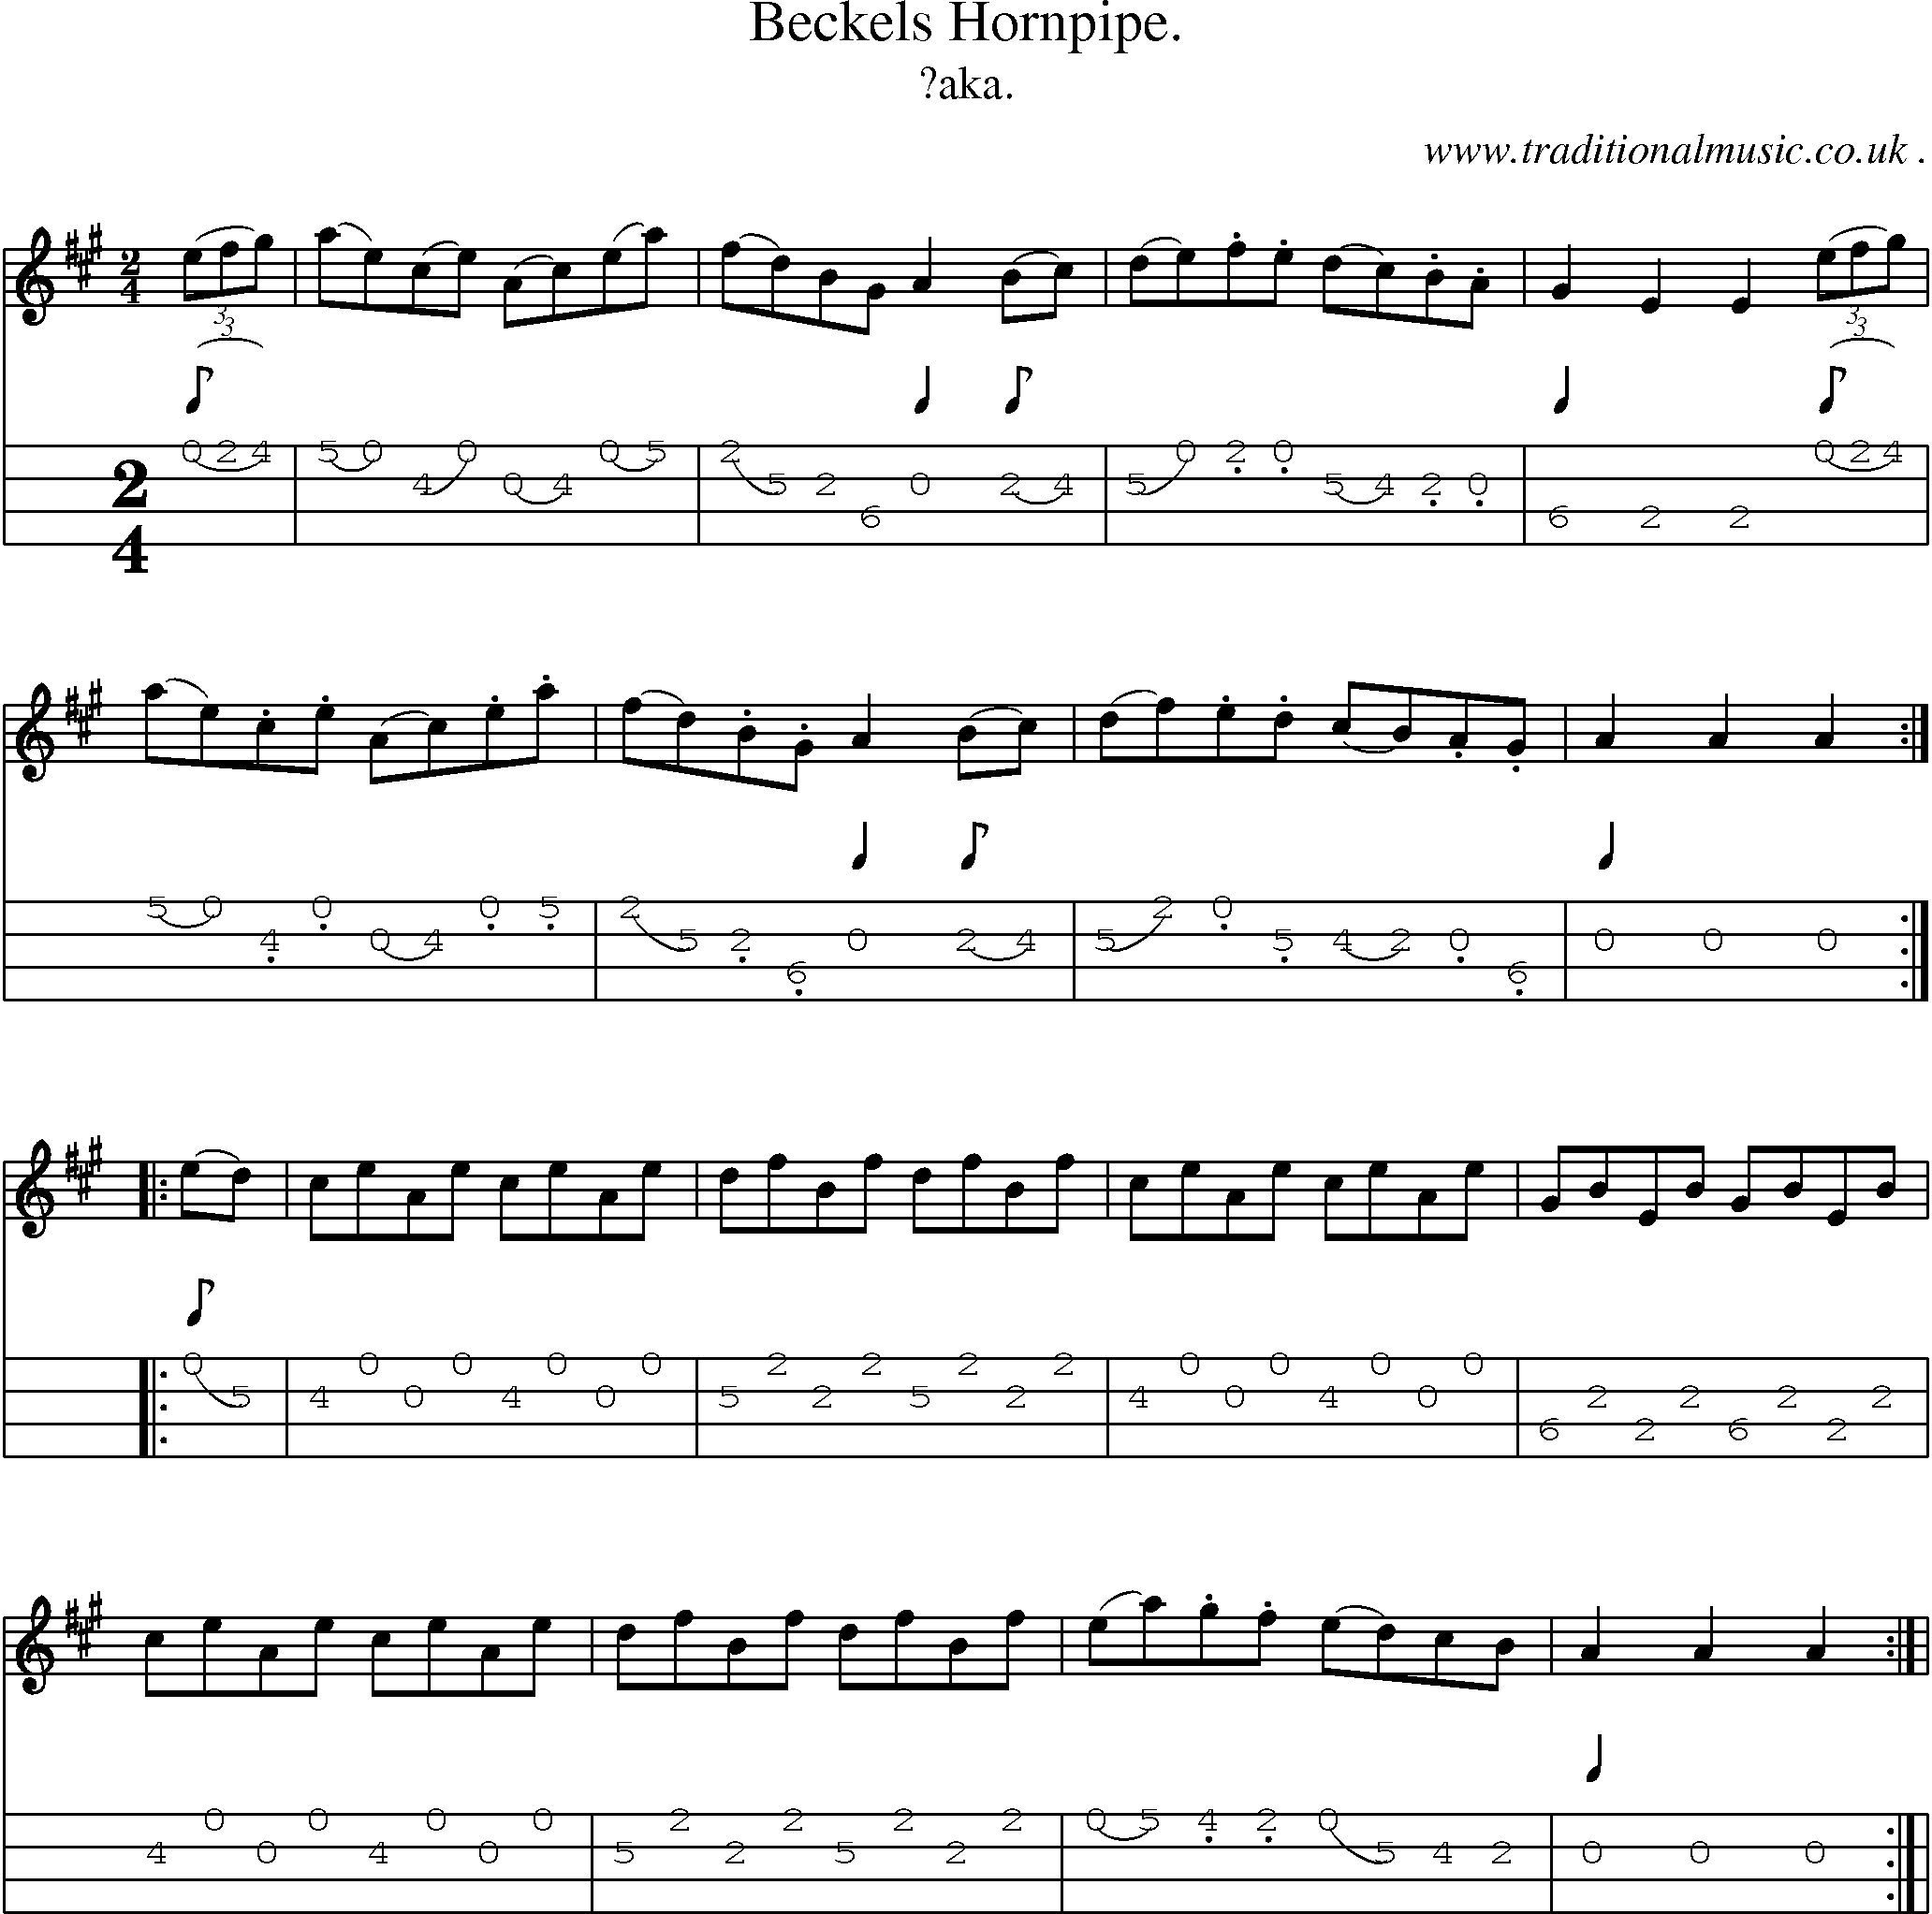 Sheet-Music and Mandolin Tabs for Beckels Hornpipe